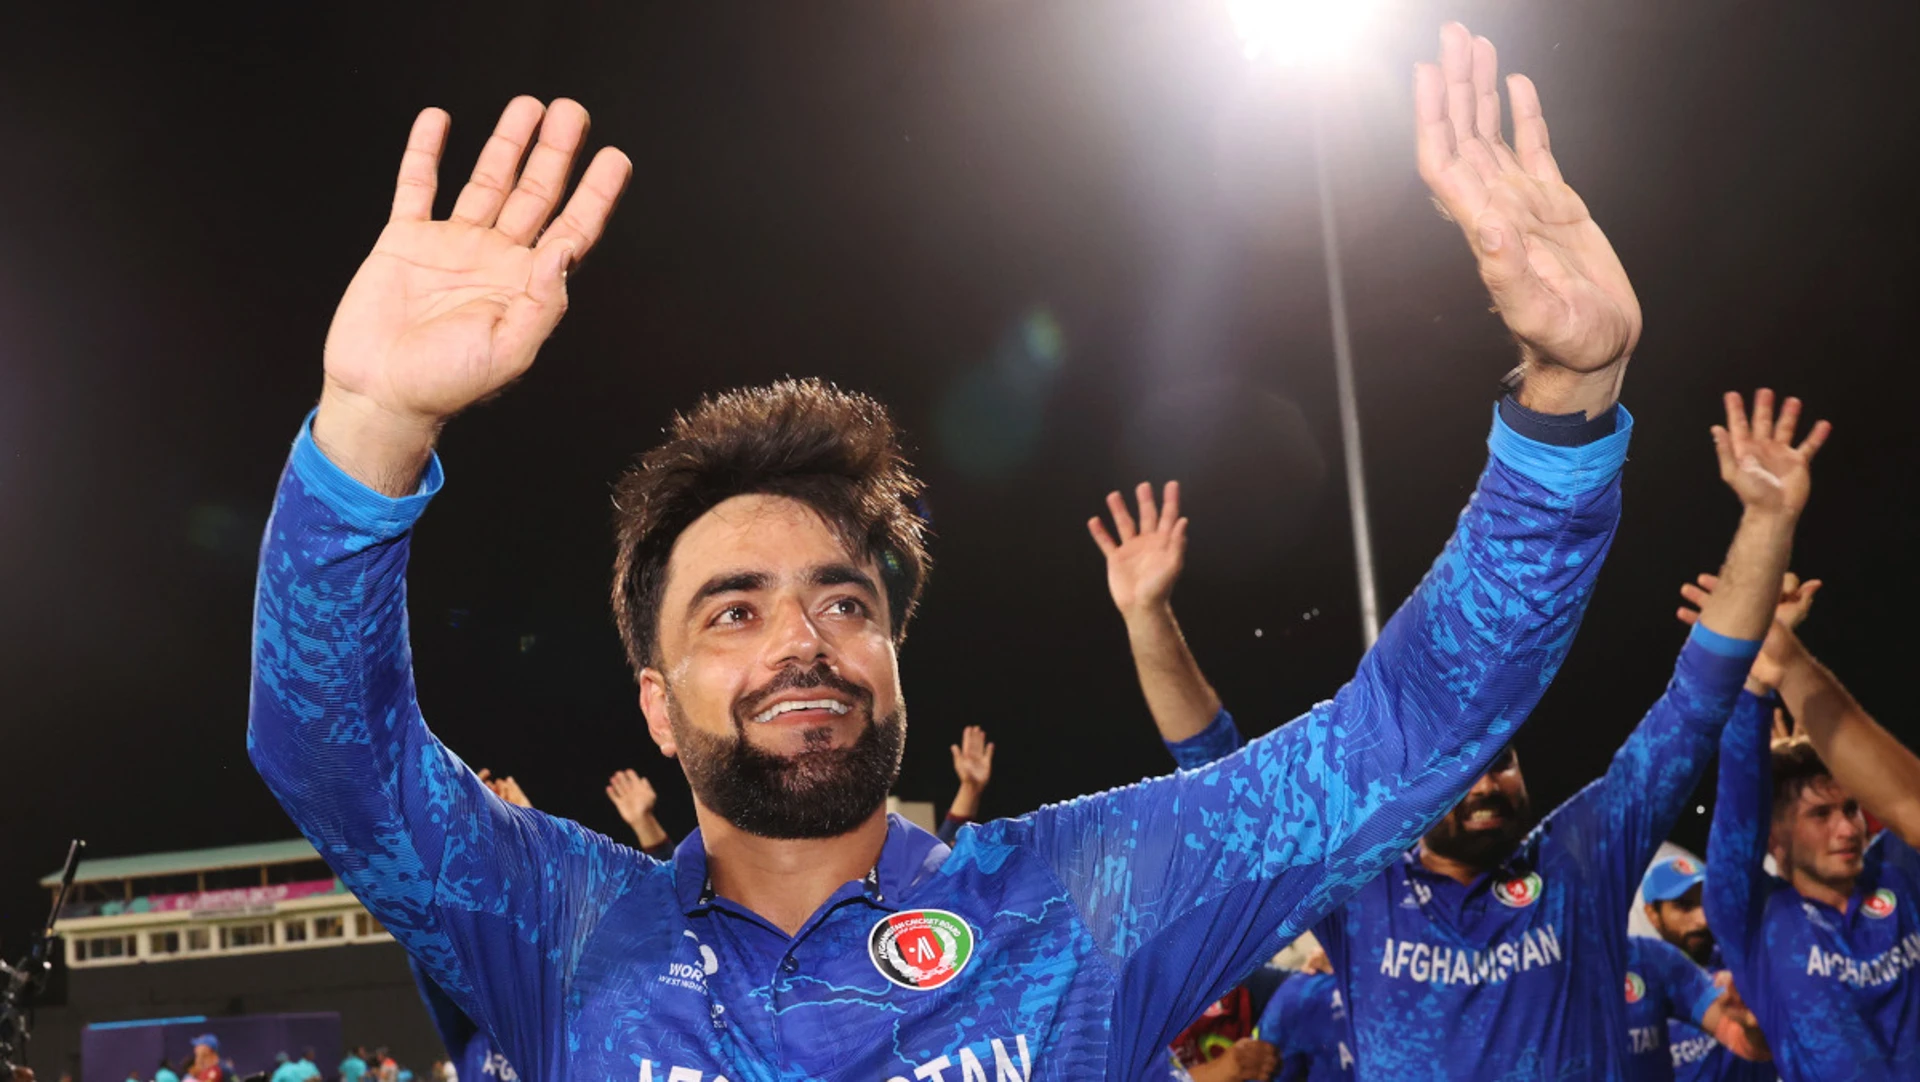 Rashid Khan: From refugee to Afghanistan's World Cup warrior